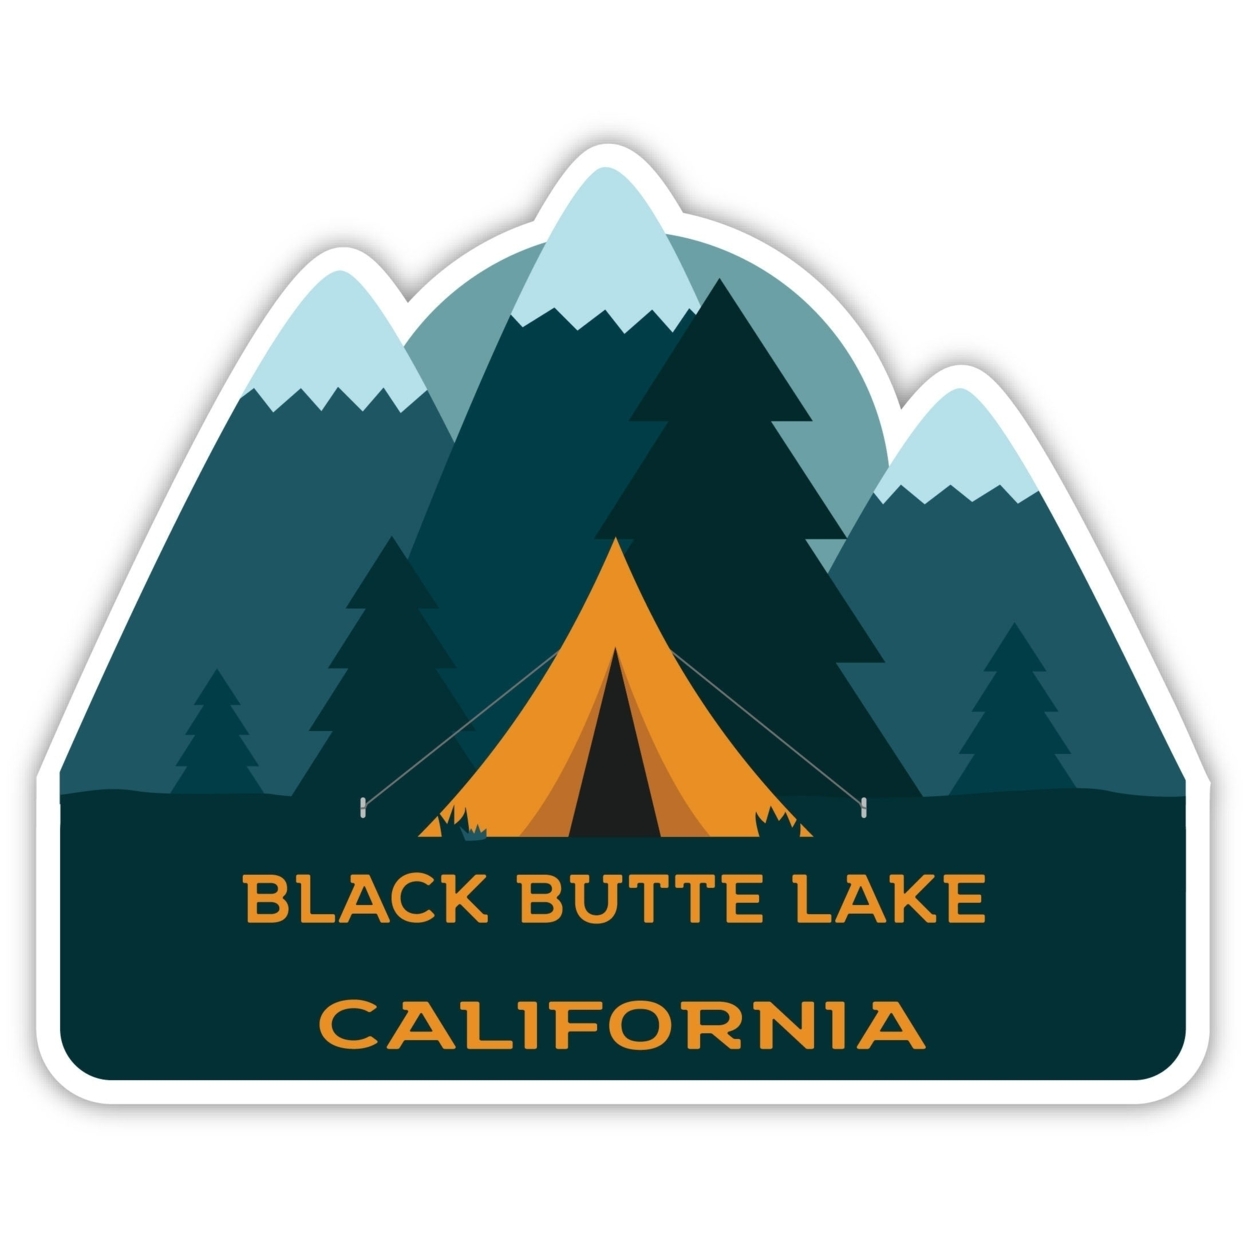 Black Butte Lake California Souvenir Decorative Stickers (Choose Theme And Size) - 4-Pack, 12-Inch, Tent